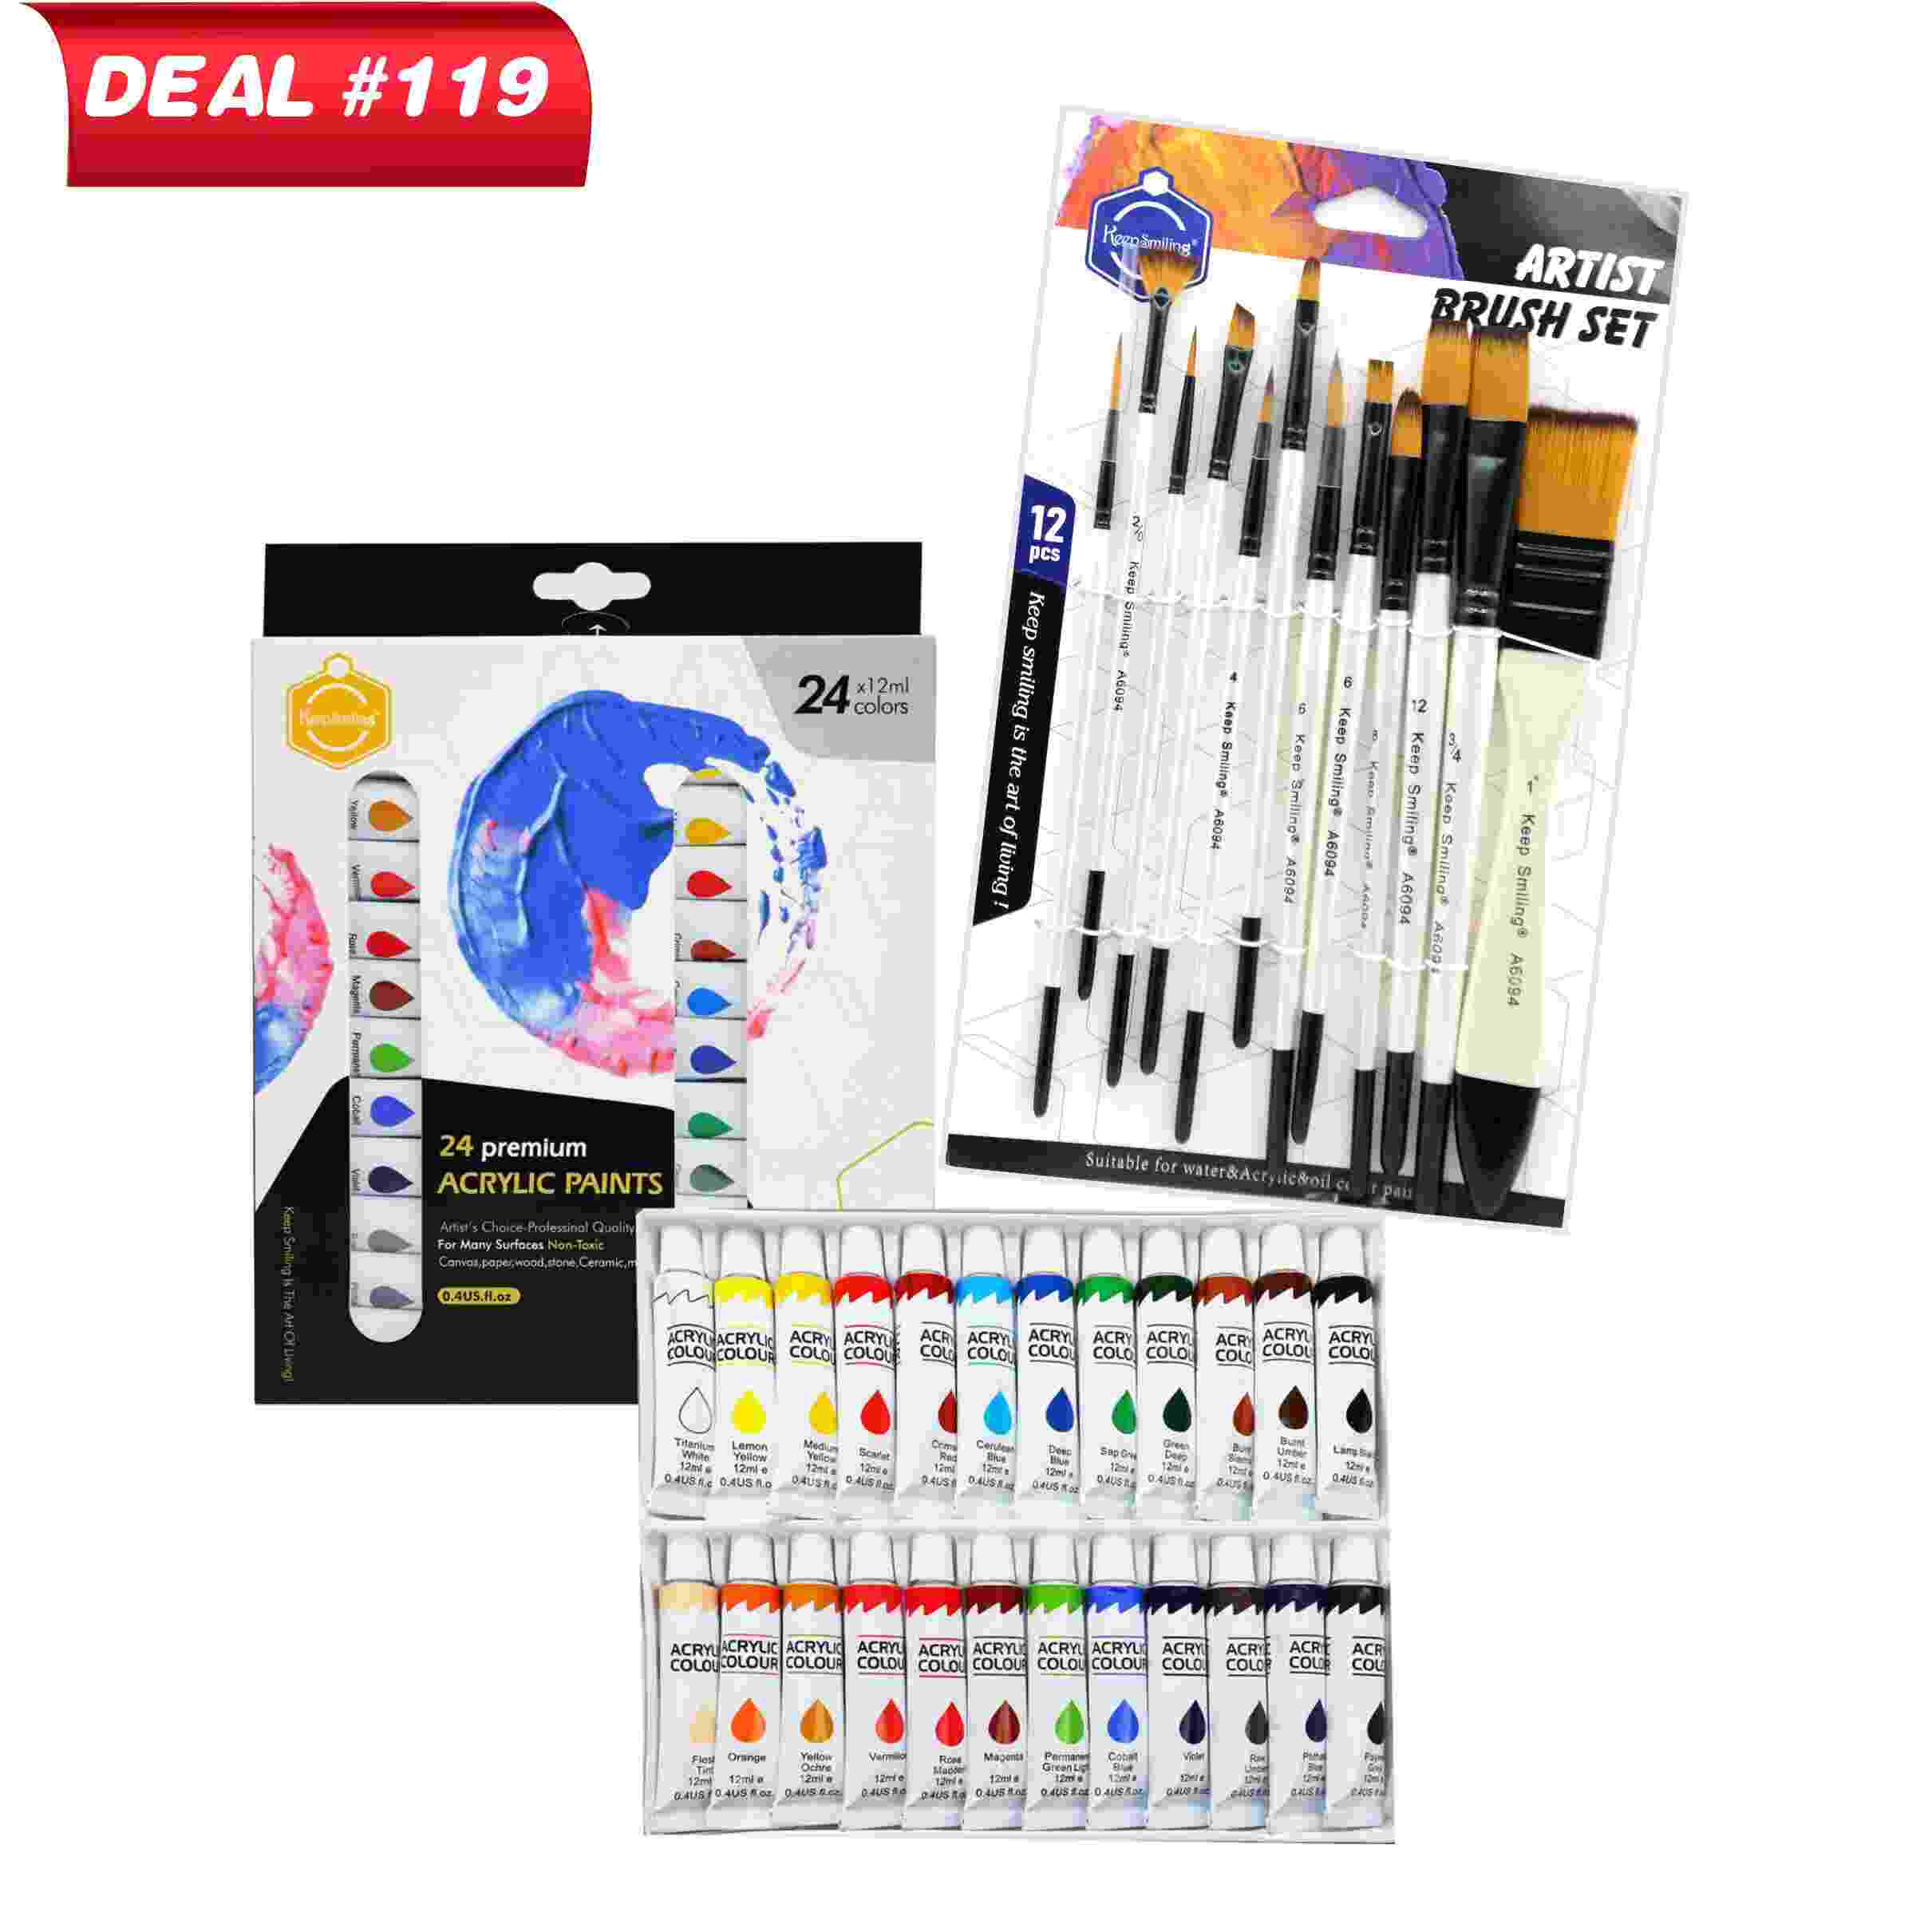 Acrylic Kit For Beginners, Deal No.119